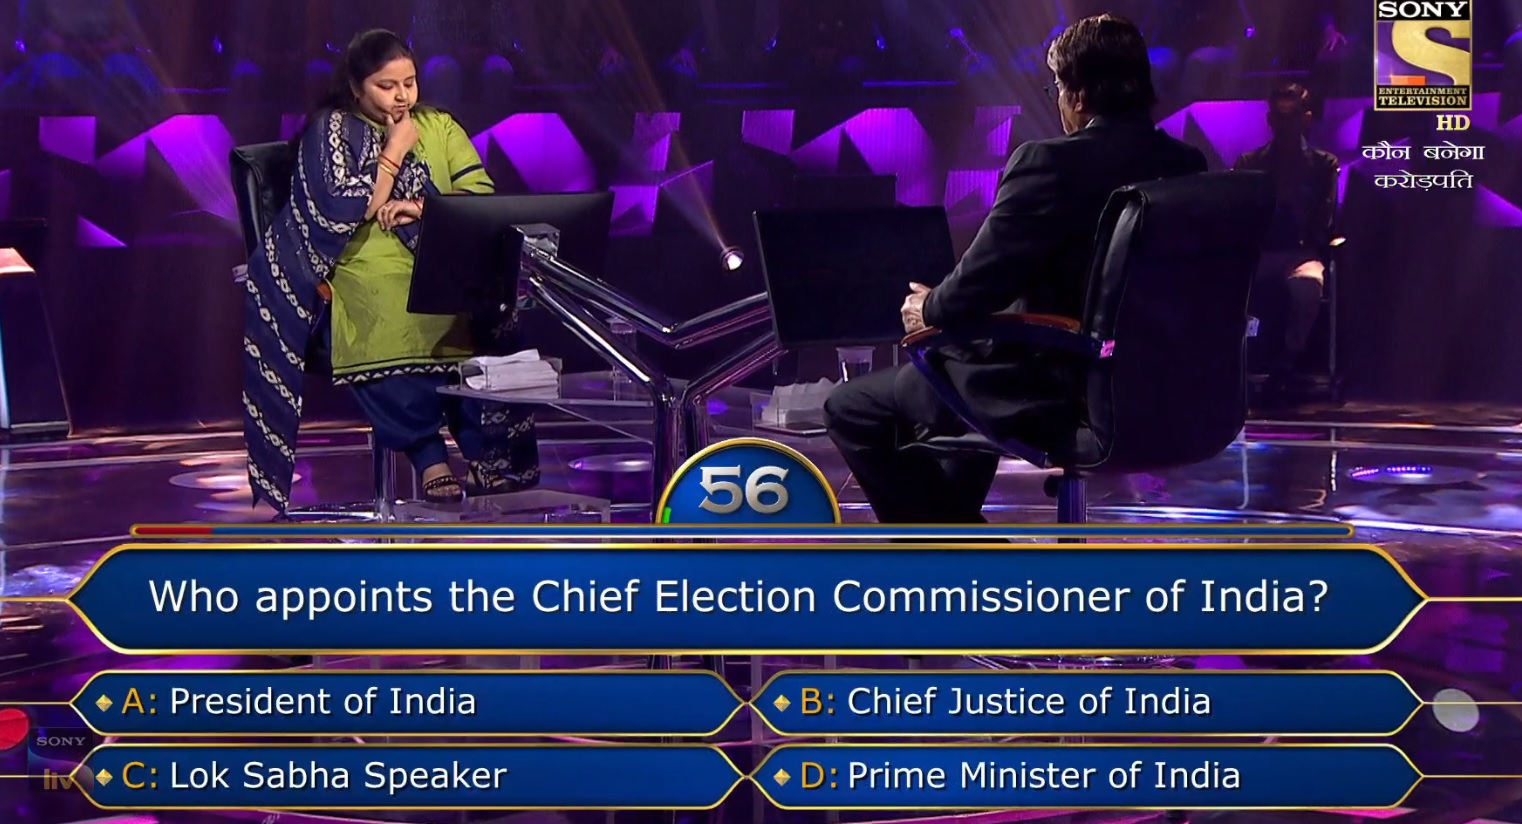 Ques : Who appoints the Chief Election Commissioner of India?